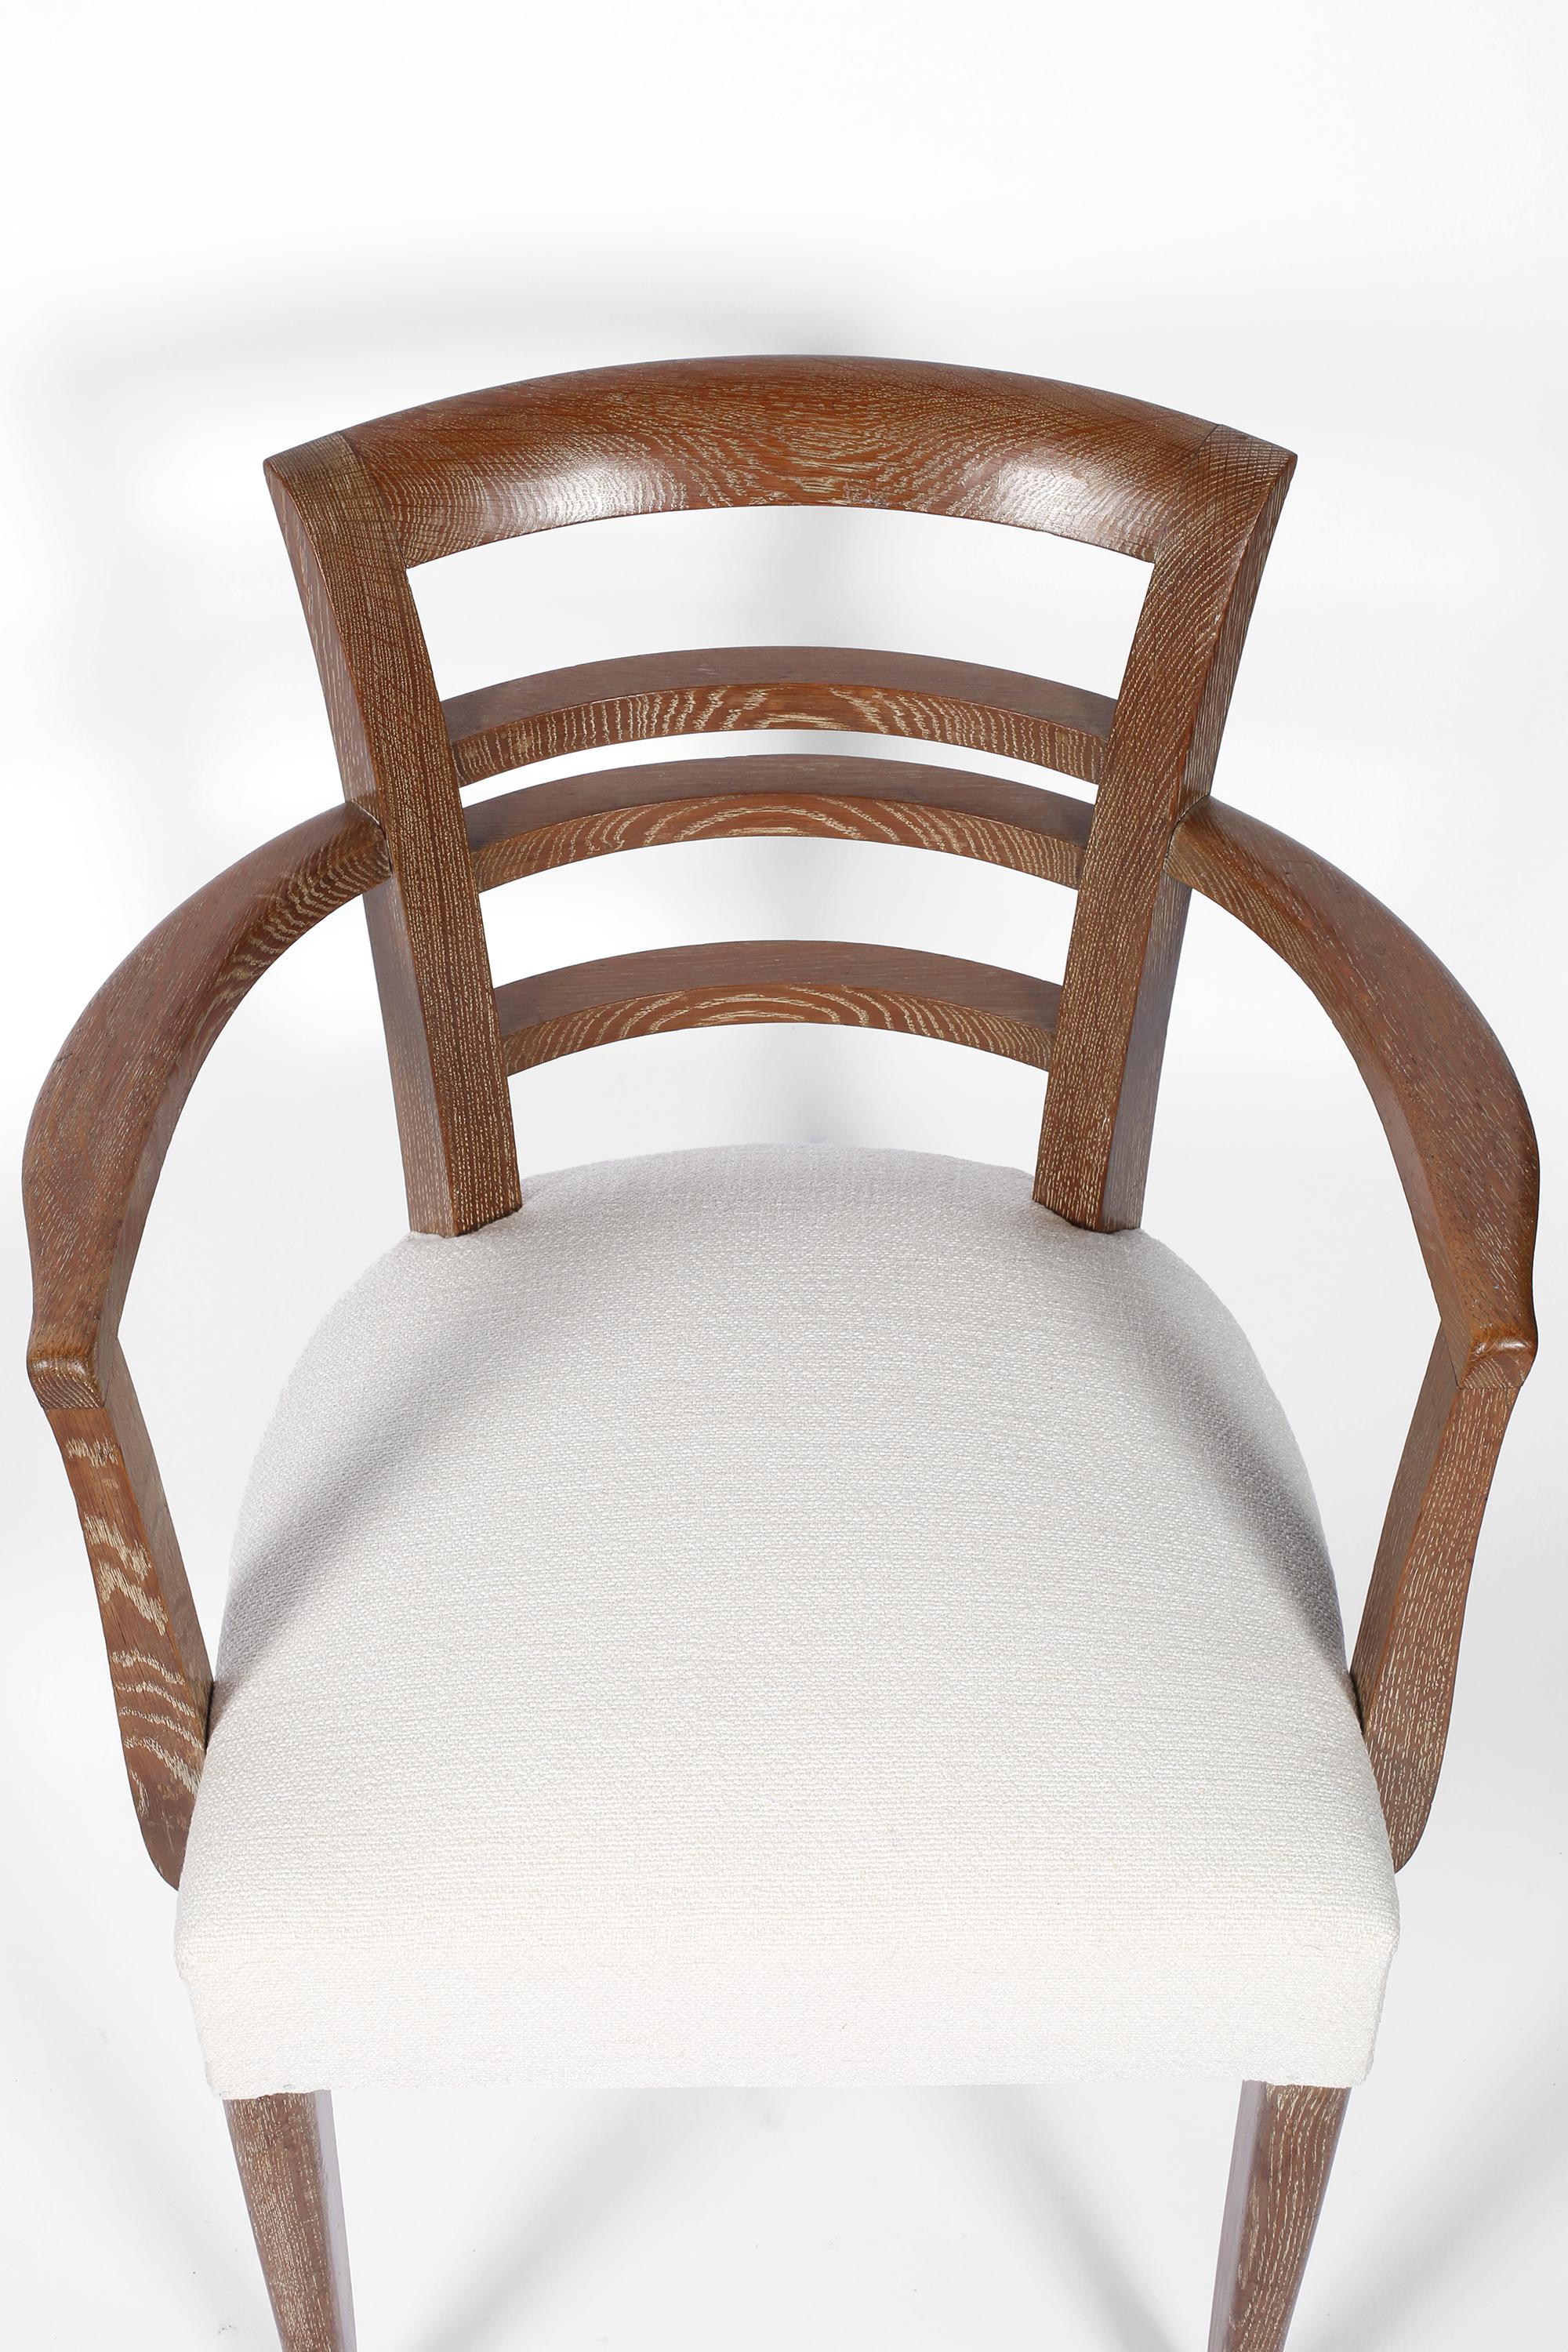 French Art Deco Limed Oak Occasional Chairs 1940s Cerused For Sale 6